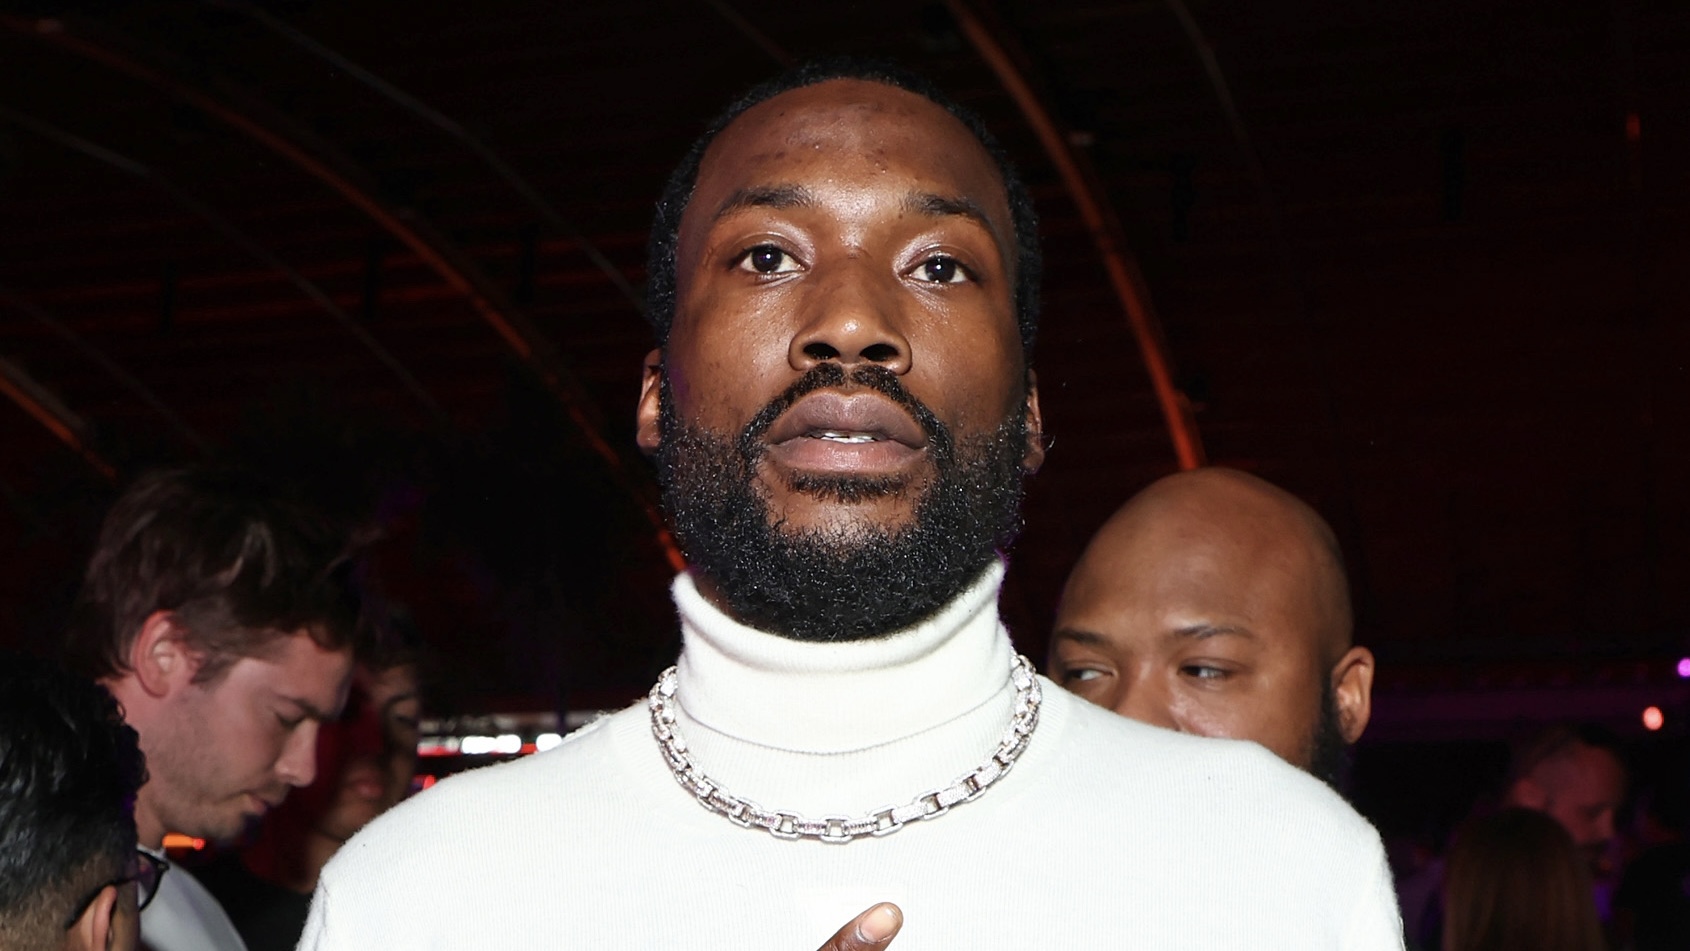 Meek Mill Addresses Backlash For Saying 'Free Tory Lanez' During Rolling Loud Performance: 'I Don't Got A Controlled Voice'